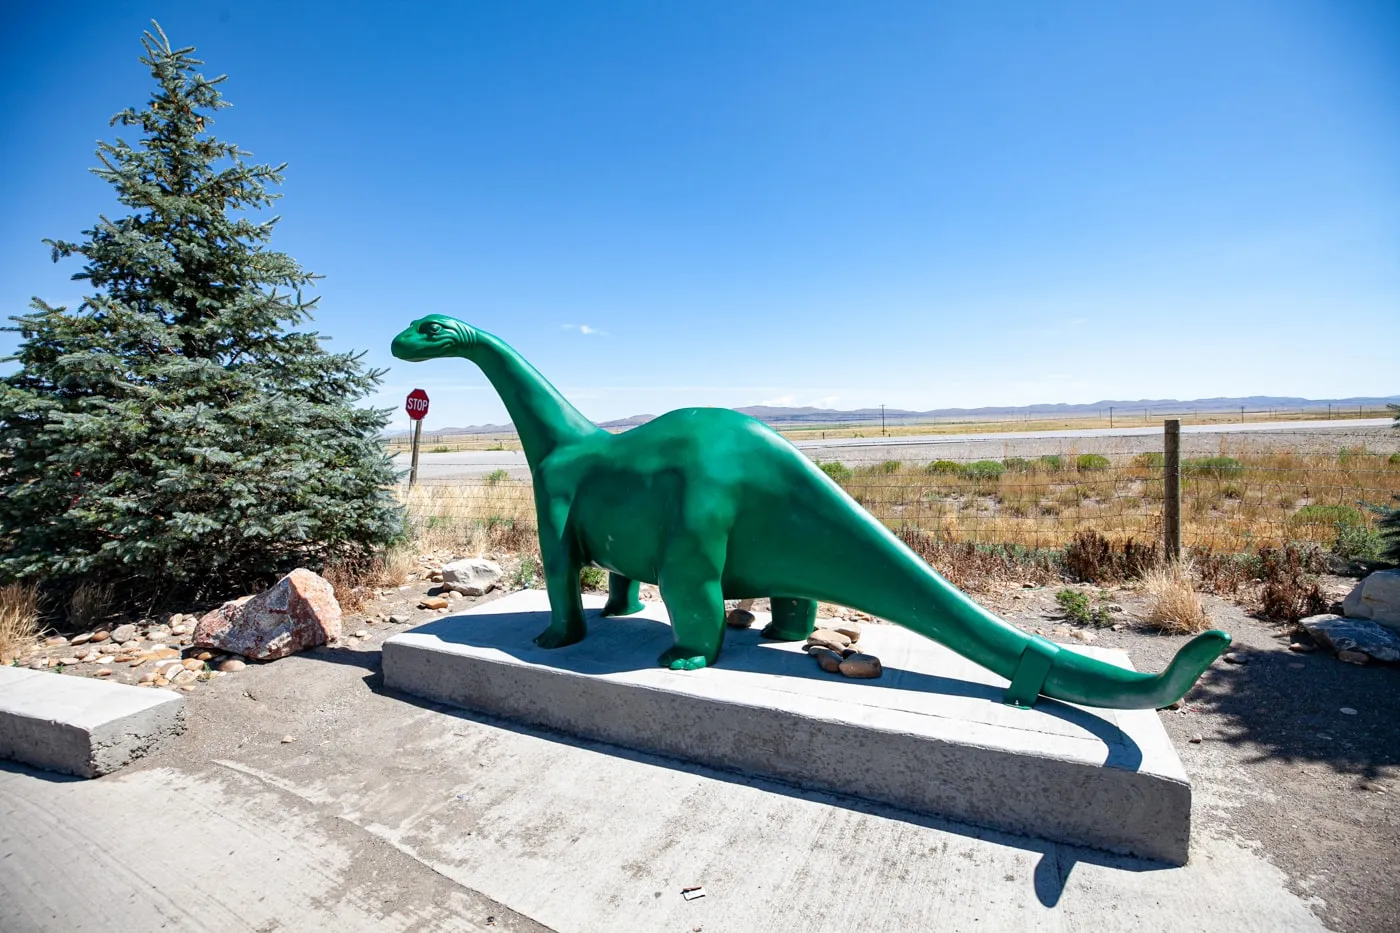 Sinclair Gas Station Dinosaur in Sinclair, Wyoming home of the Sinclair Refinery | Wyoming Roadside Attractions